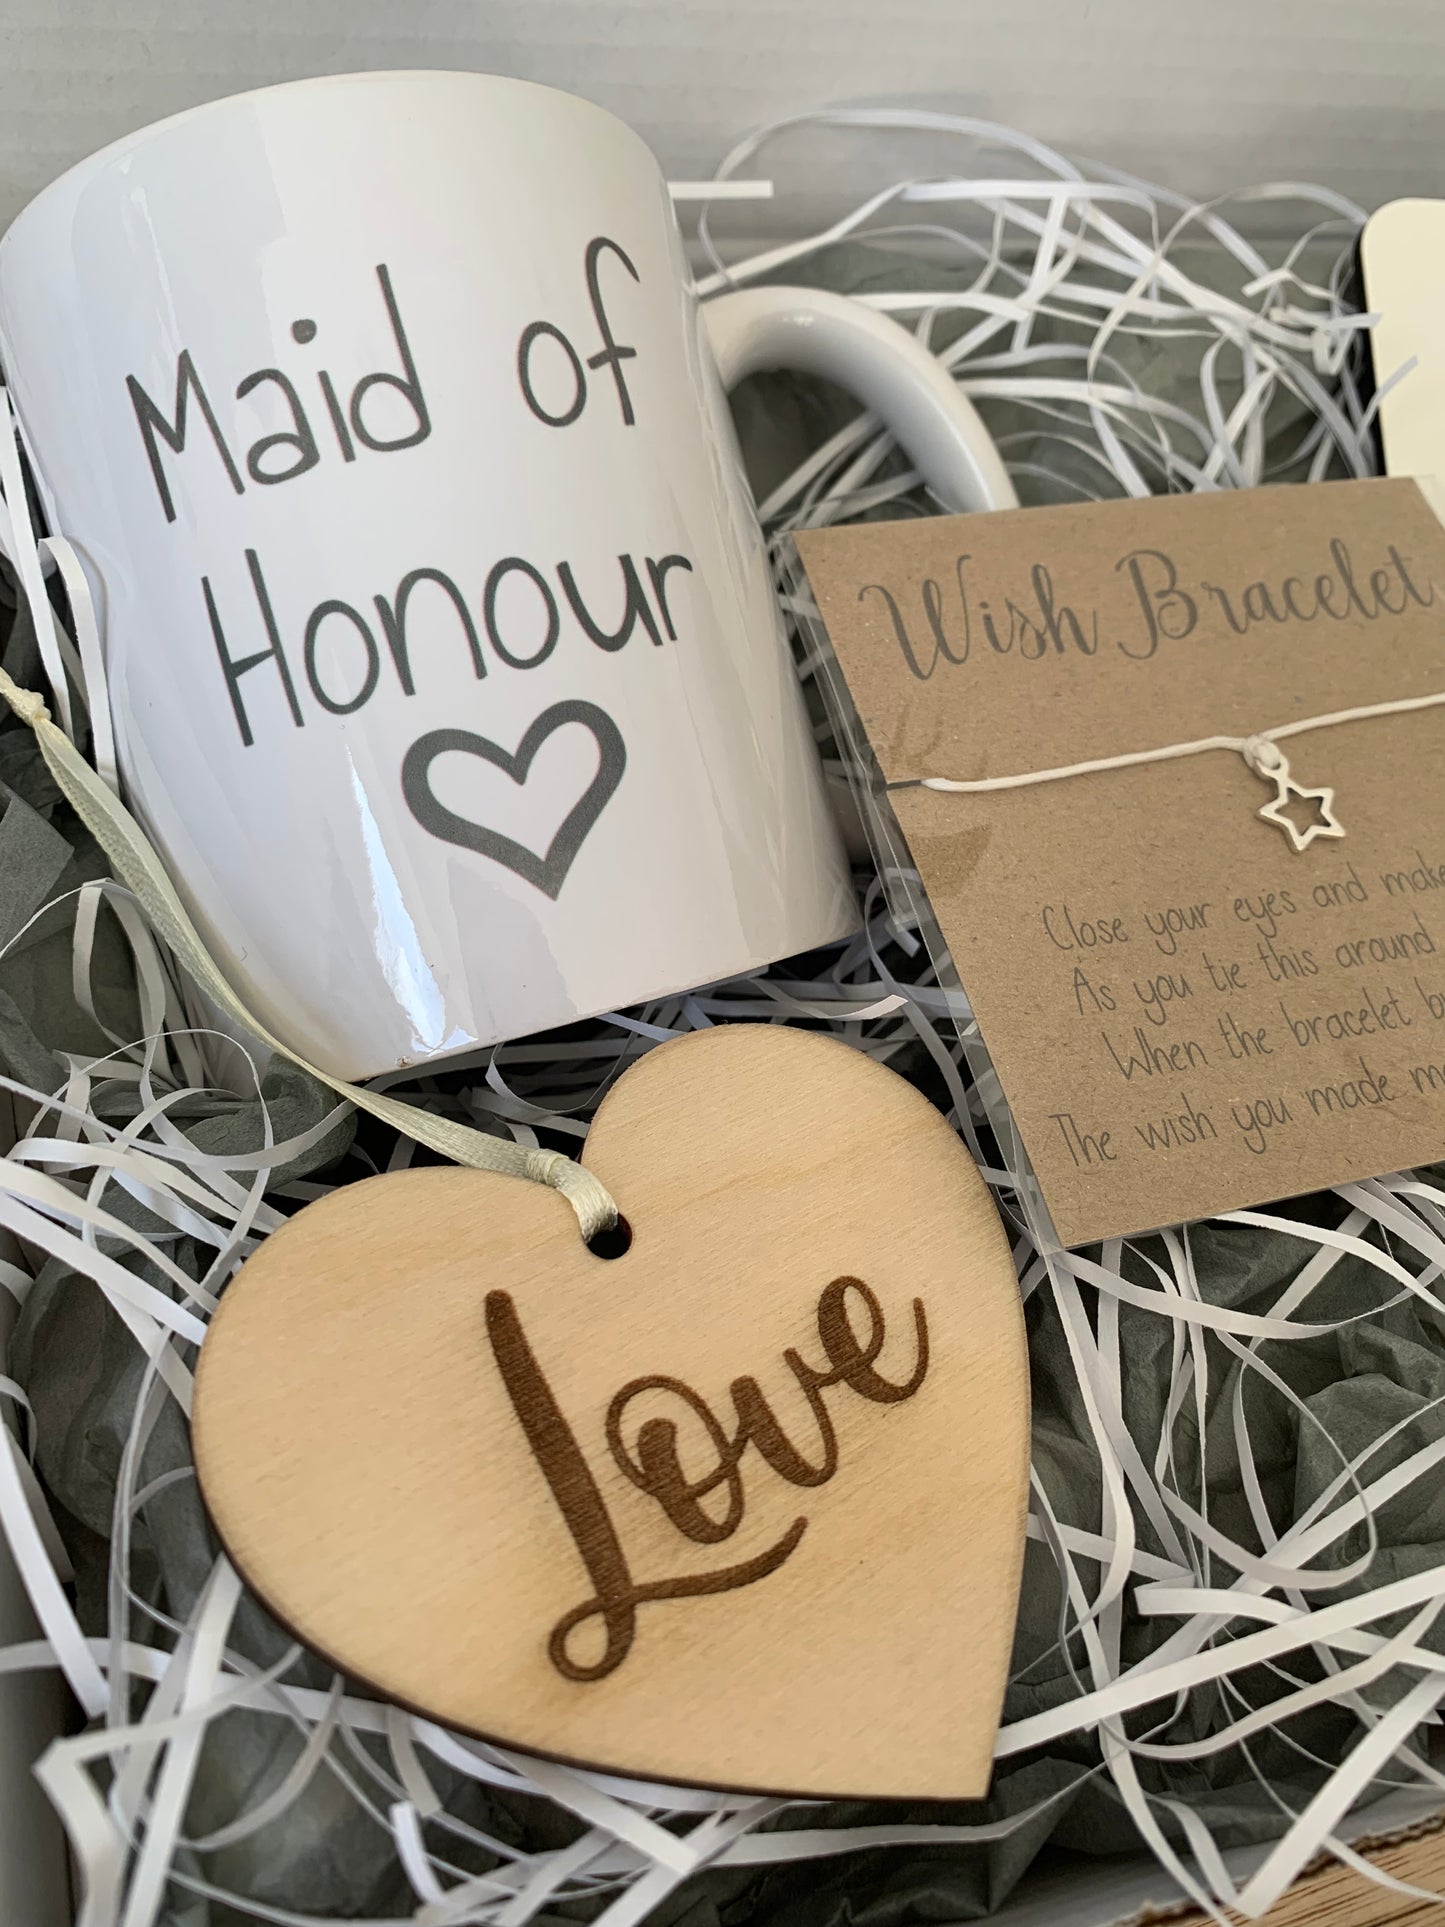 Personalised 'Will You Be My Maid of Honour' Proposal Gift Box